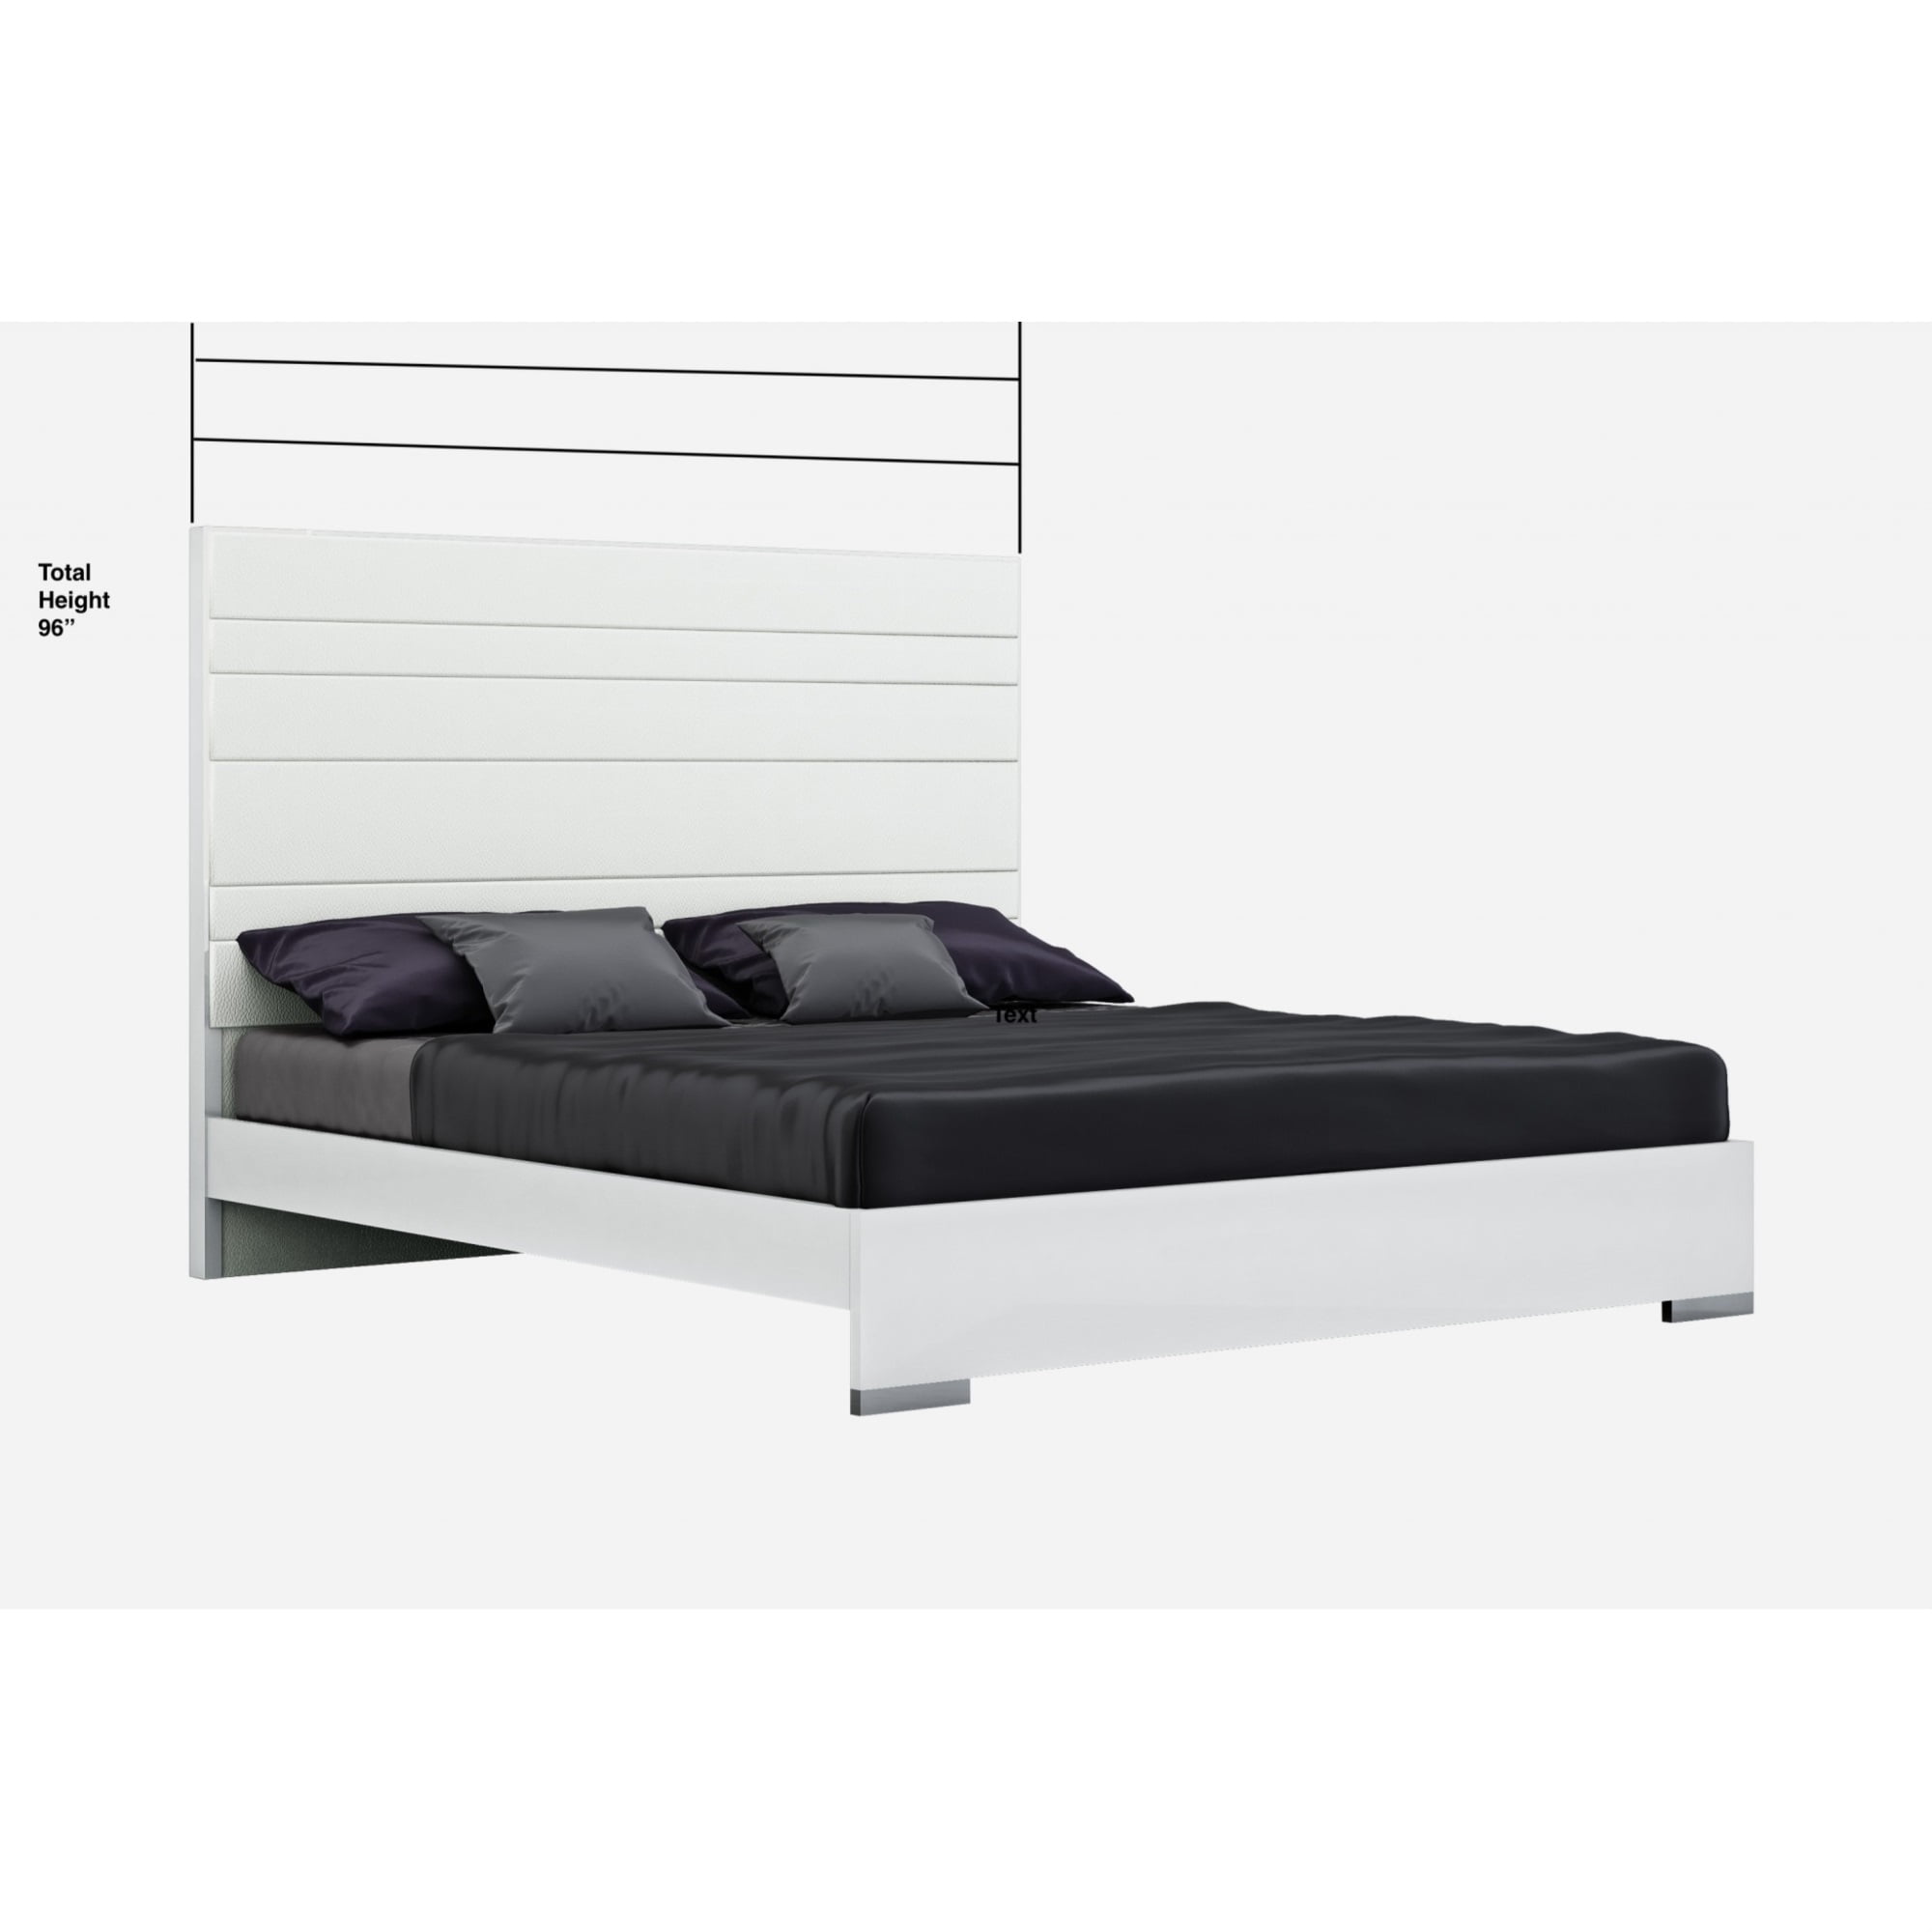 76 X 80 54 White Stainless Steel, 54 X 80 Bed Frame